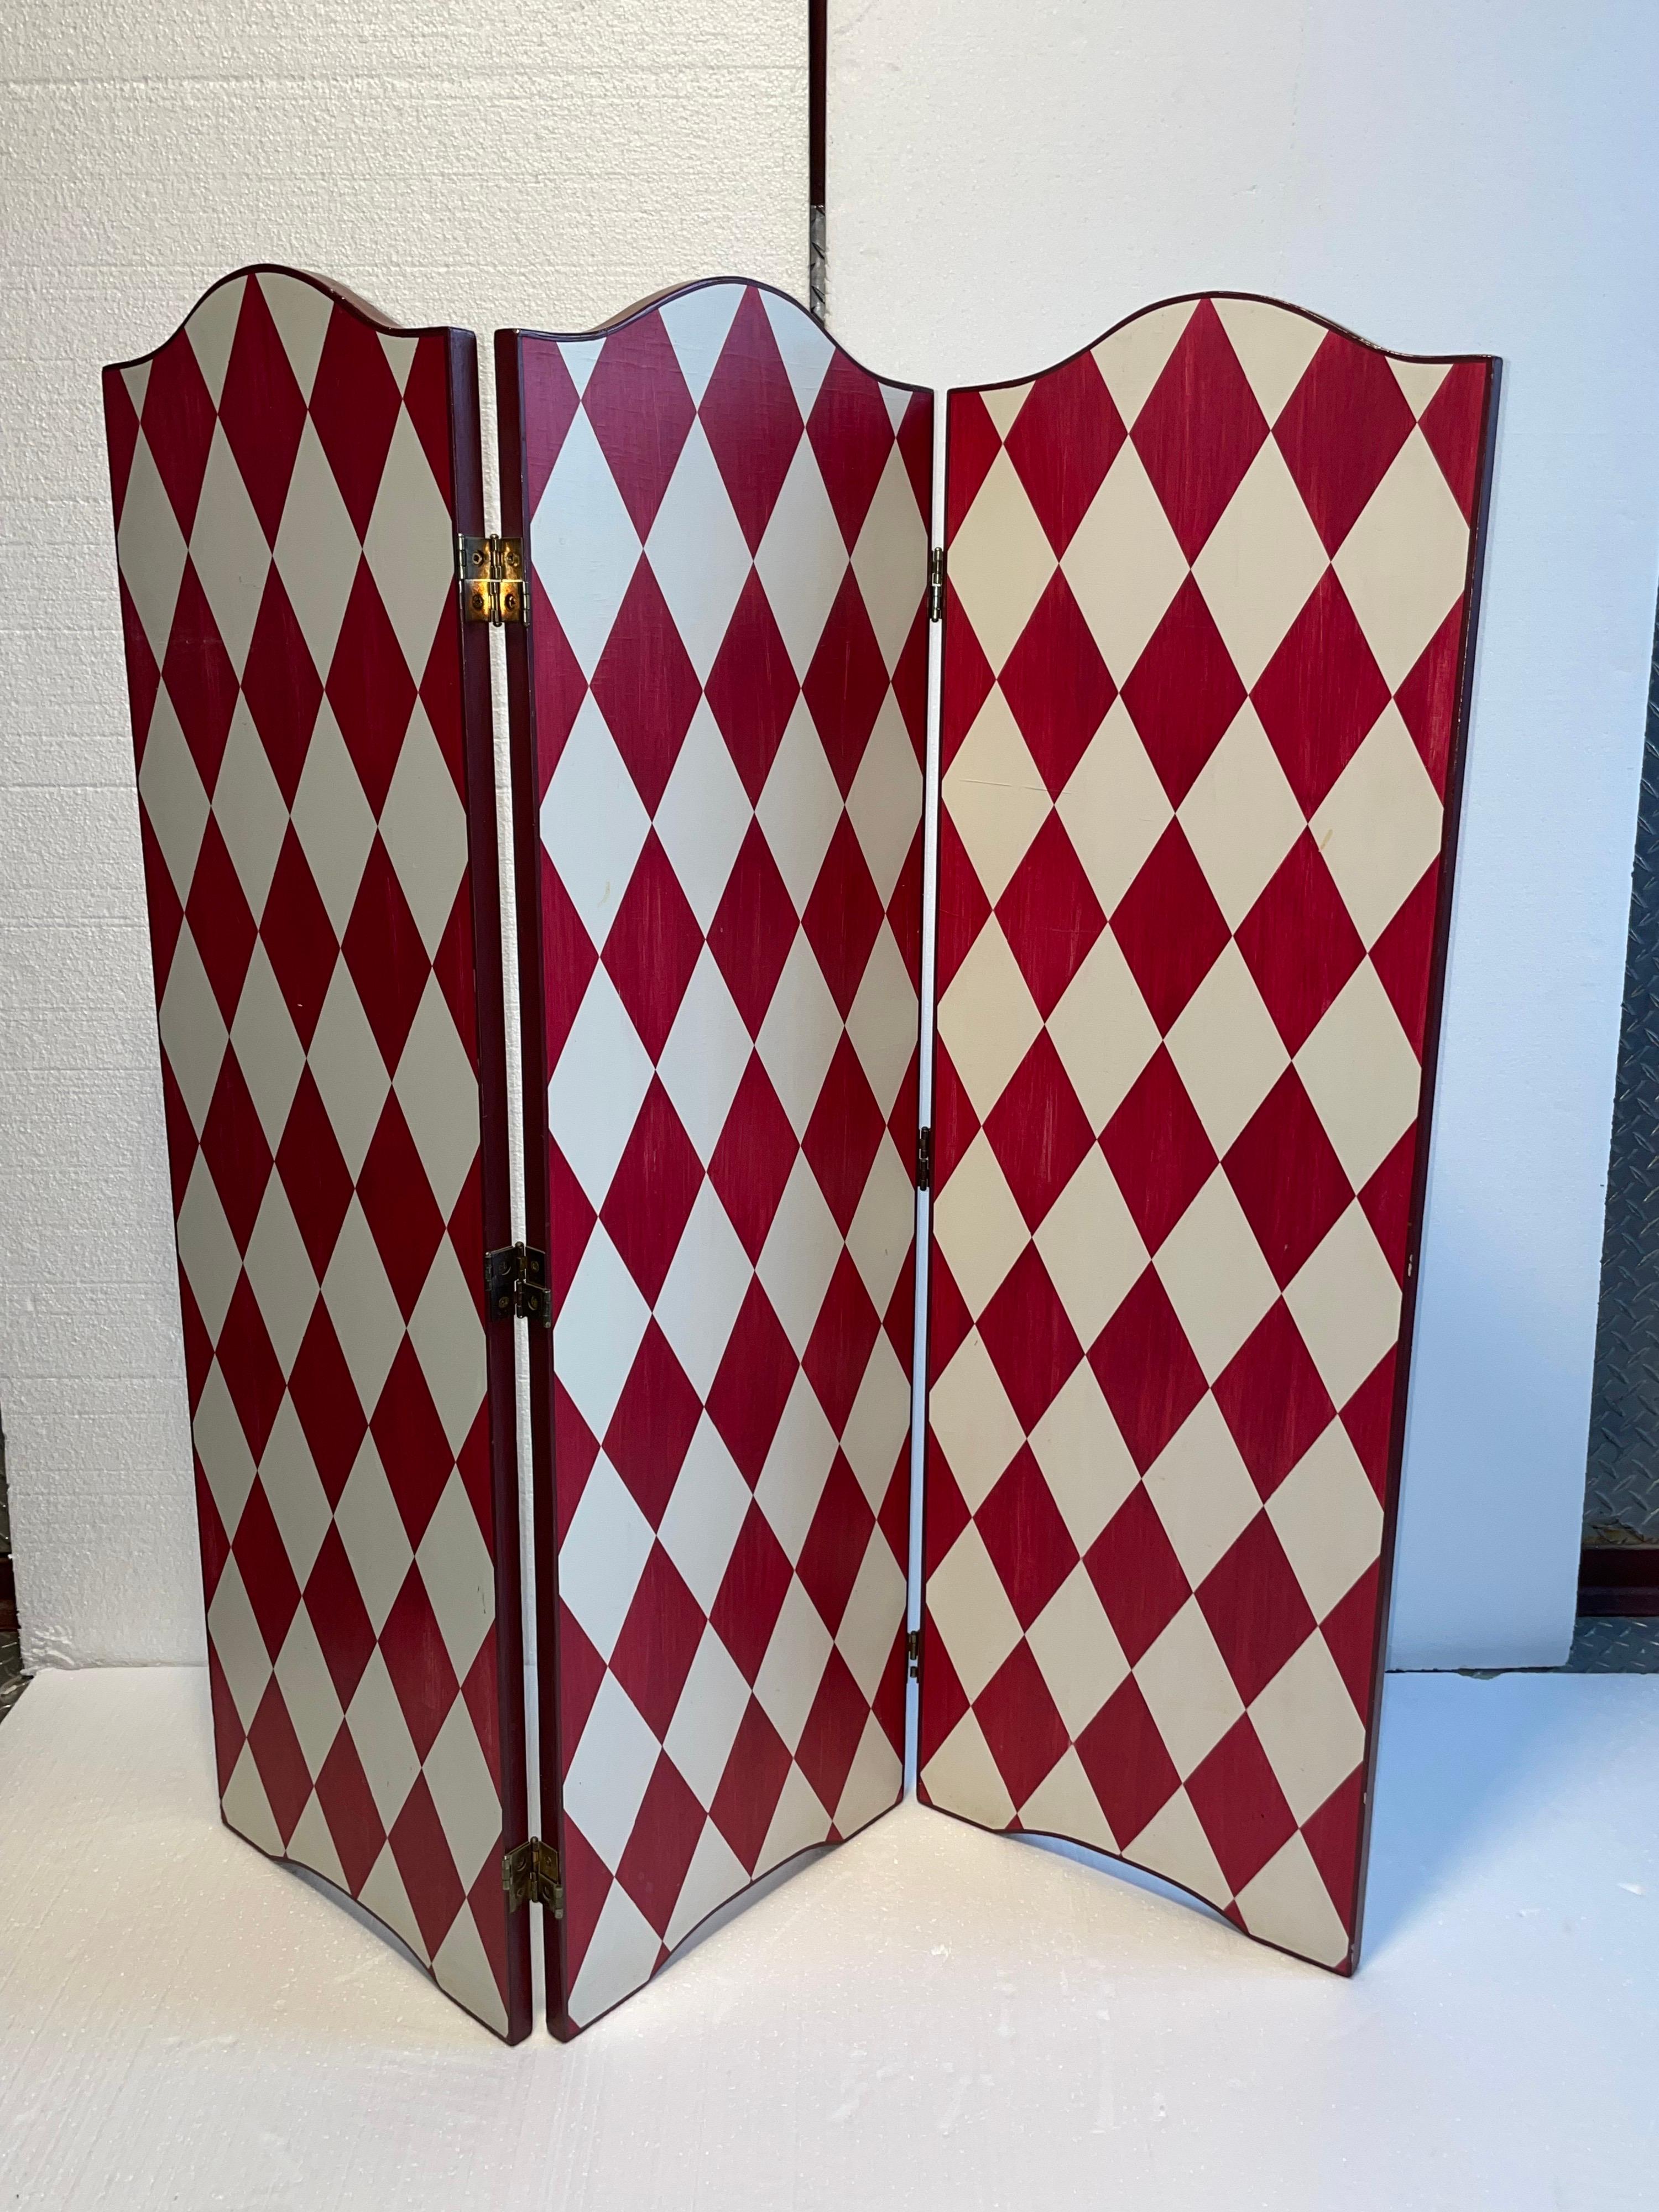 Artistic Hand painted Screen divider in a festive white and deep red. 